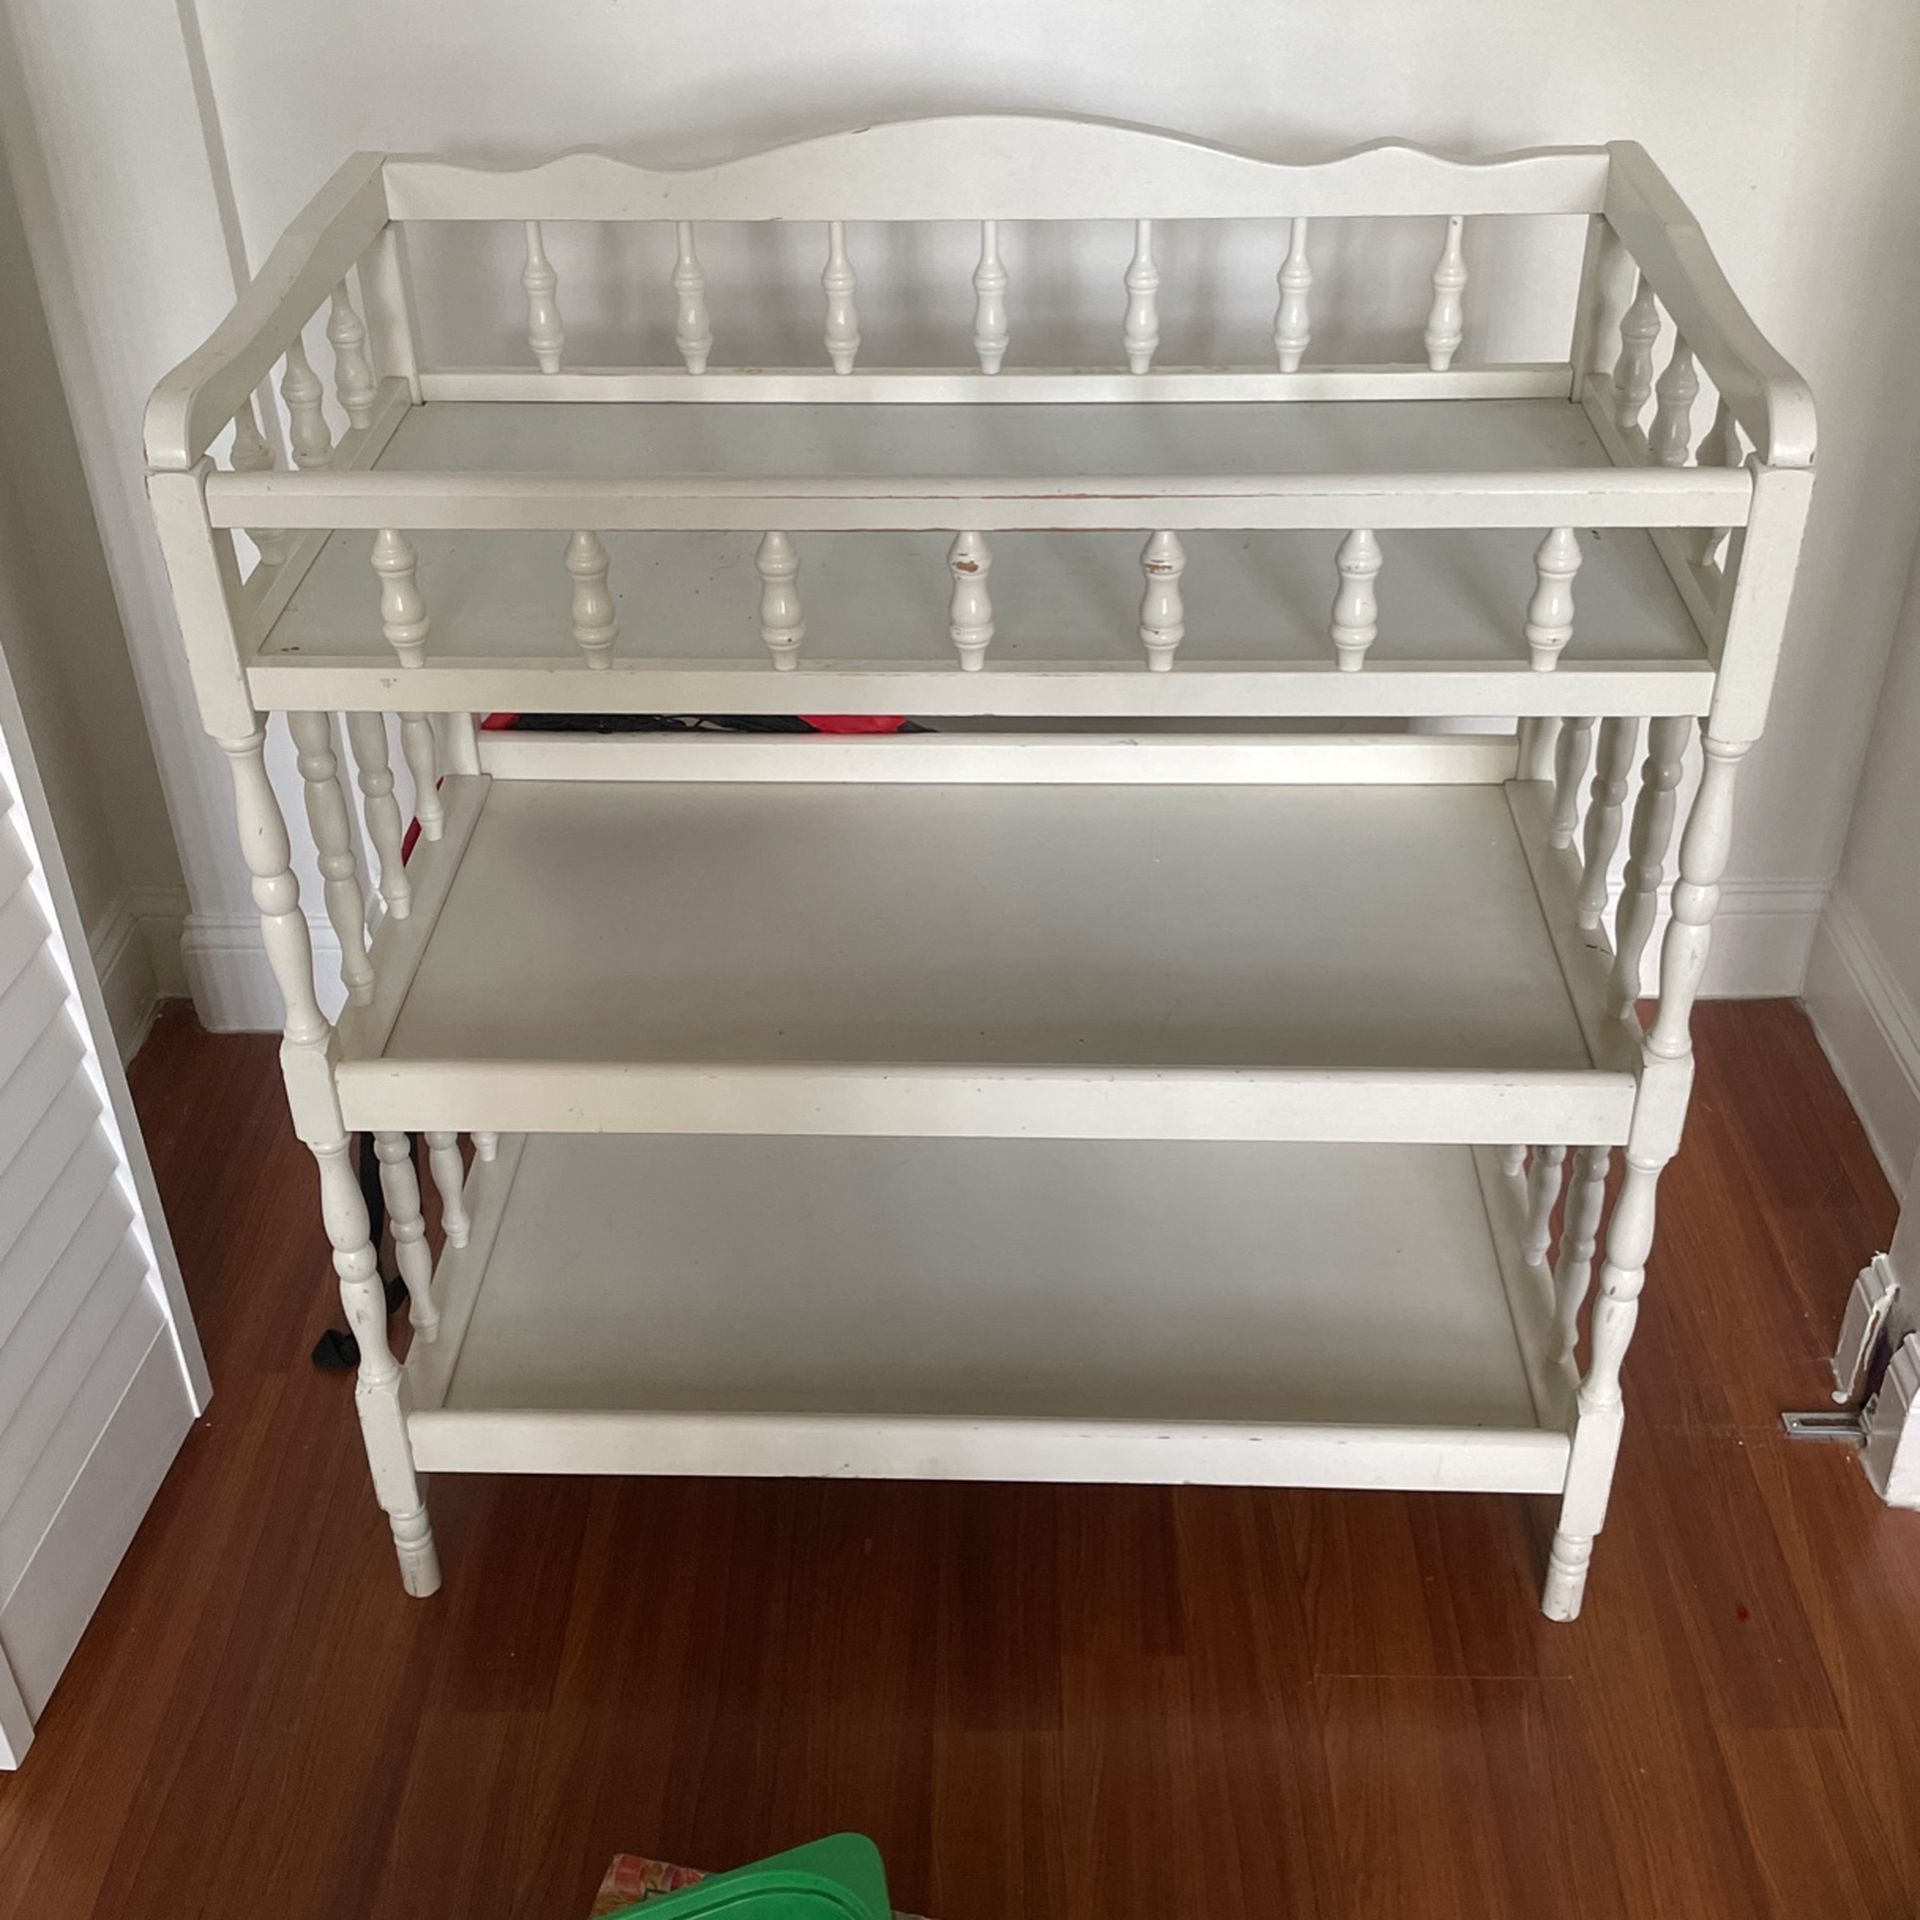 Wooden Baby Changing Table